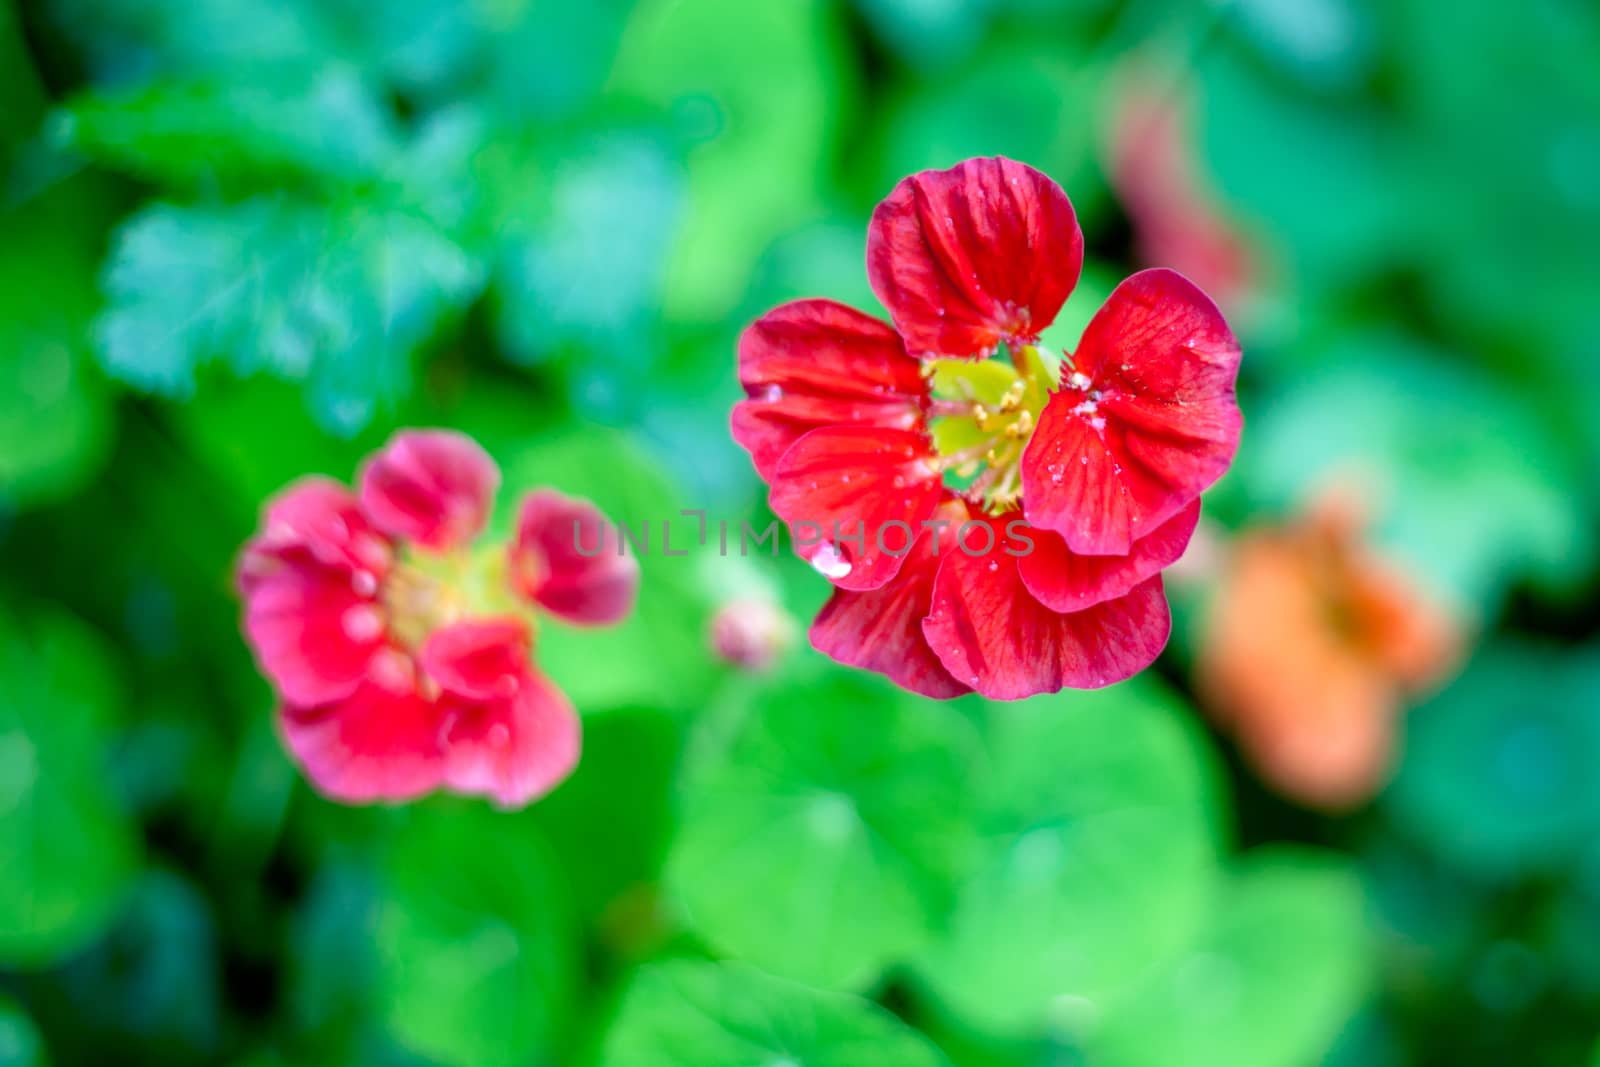 Two red flowers on a green background
